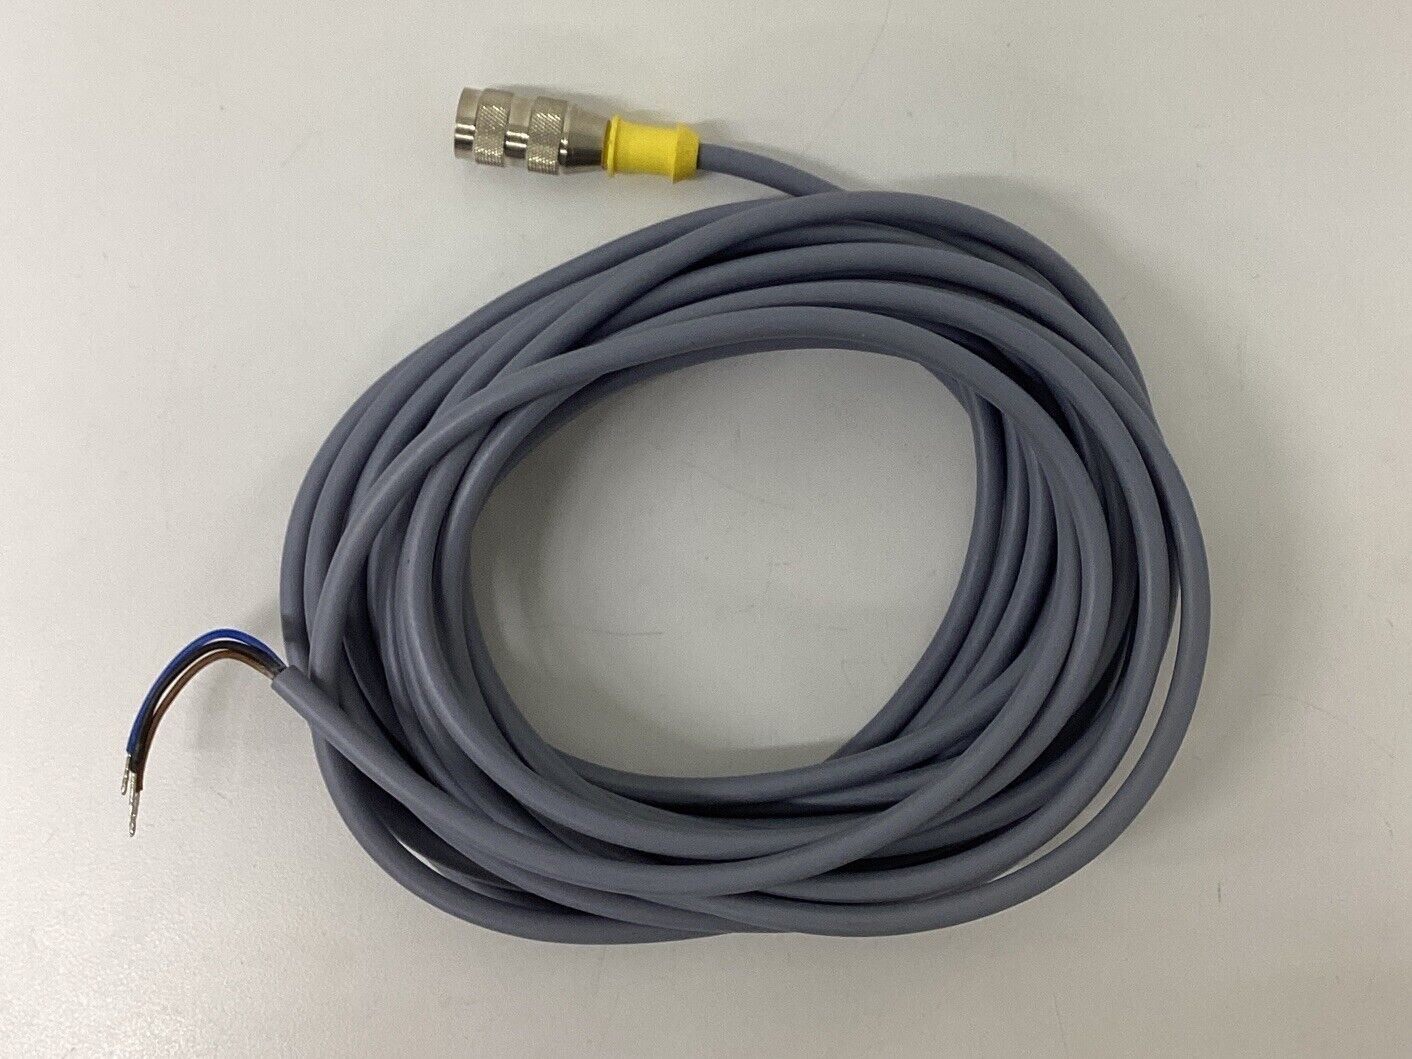 Turck RK4T-7/S101 M12 Female Single End 3-Wire Cable 7 Meter (RE142)